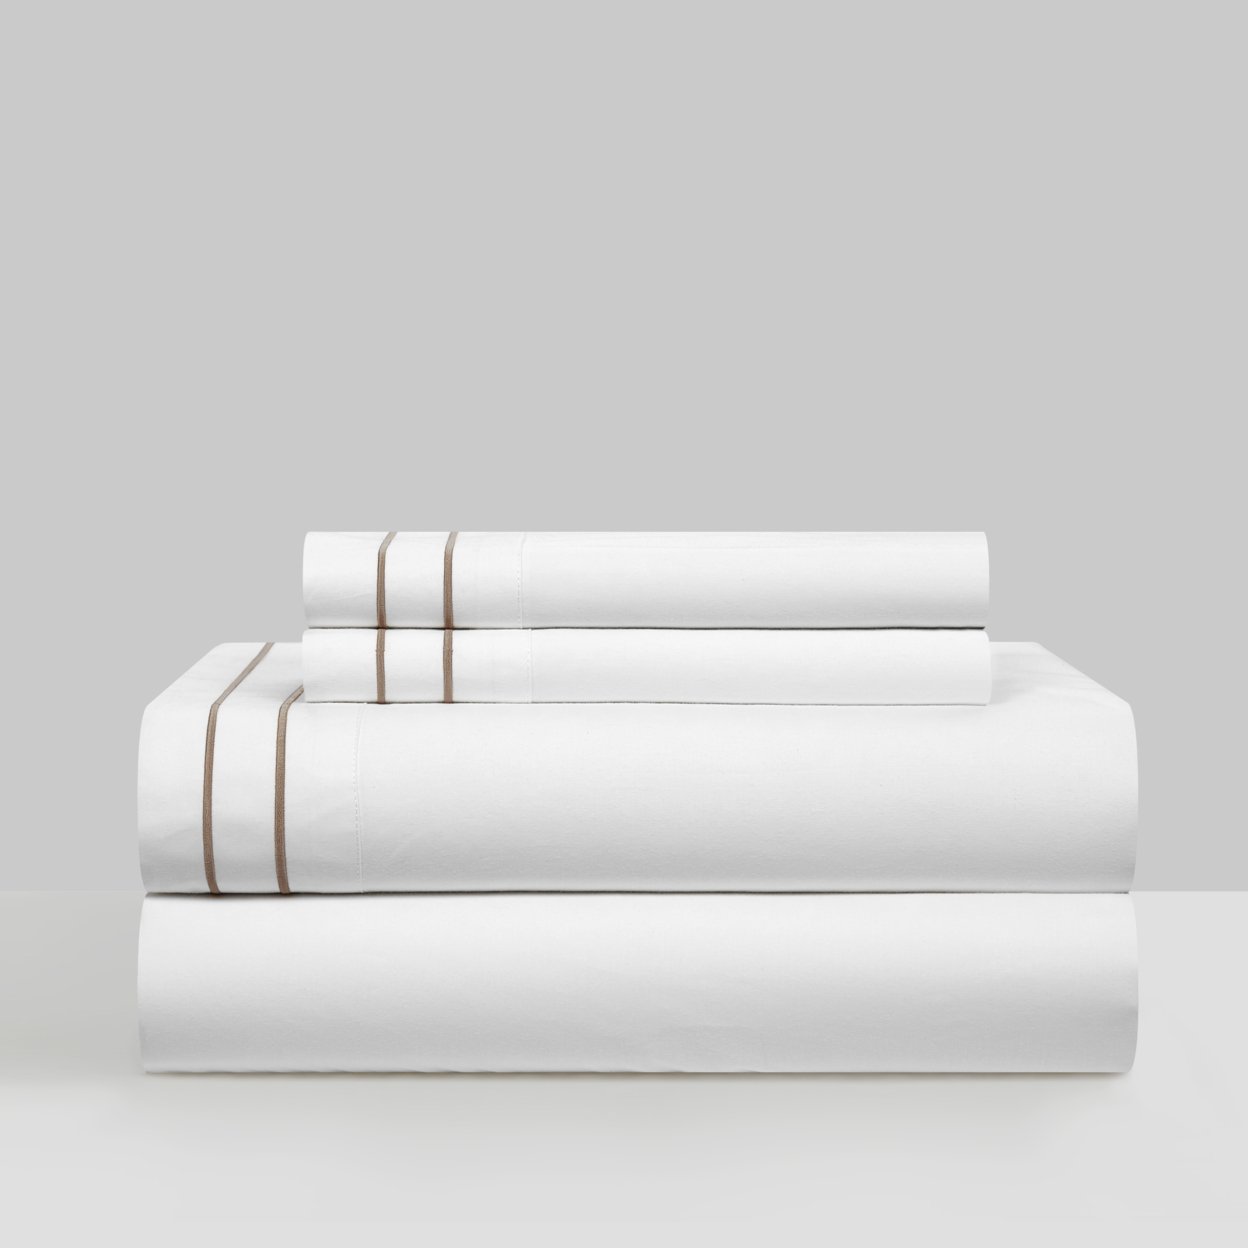 Balensia 4 Piece Organic Cotton Sheet Set Solid White With Dual Stripe Embroidery - Beige, Queen